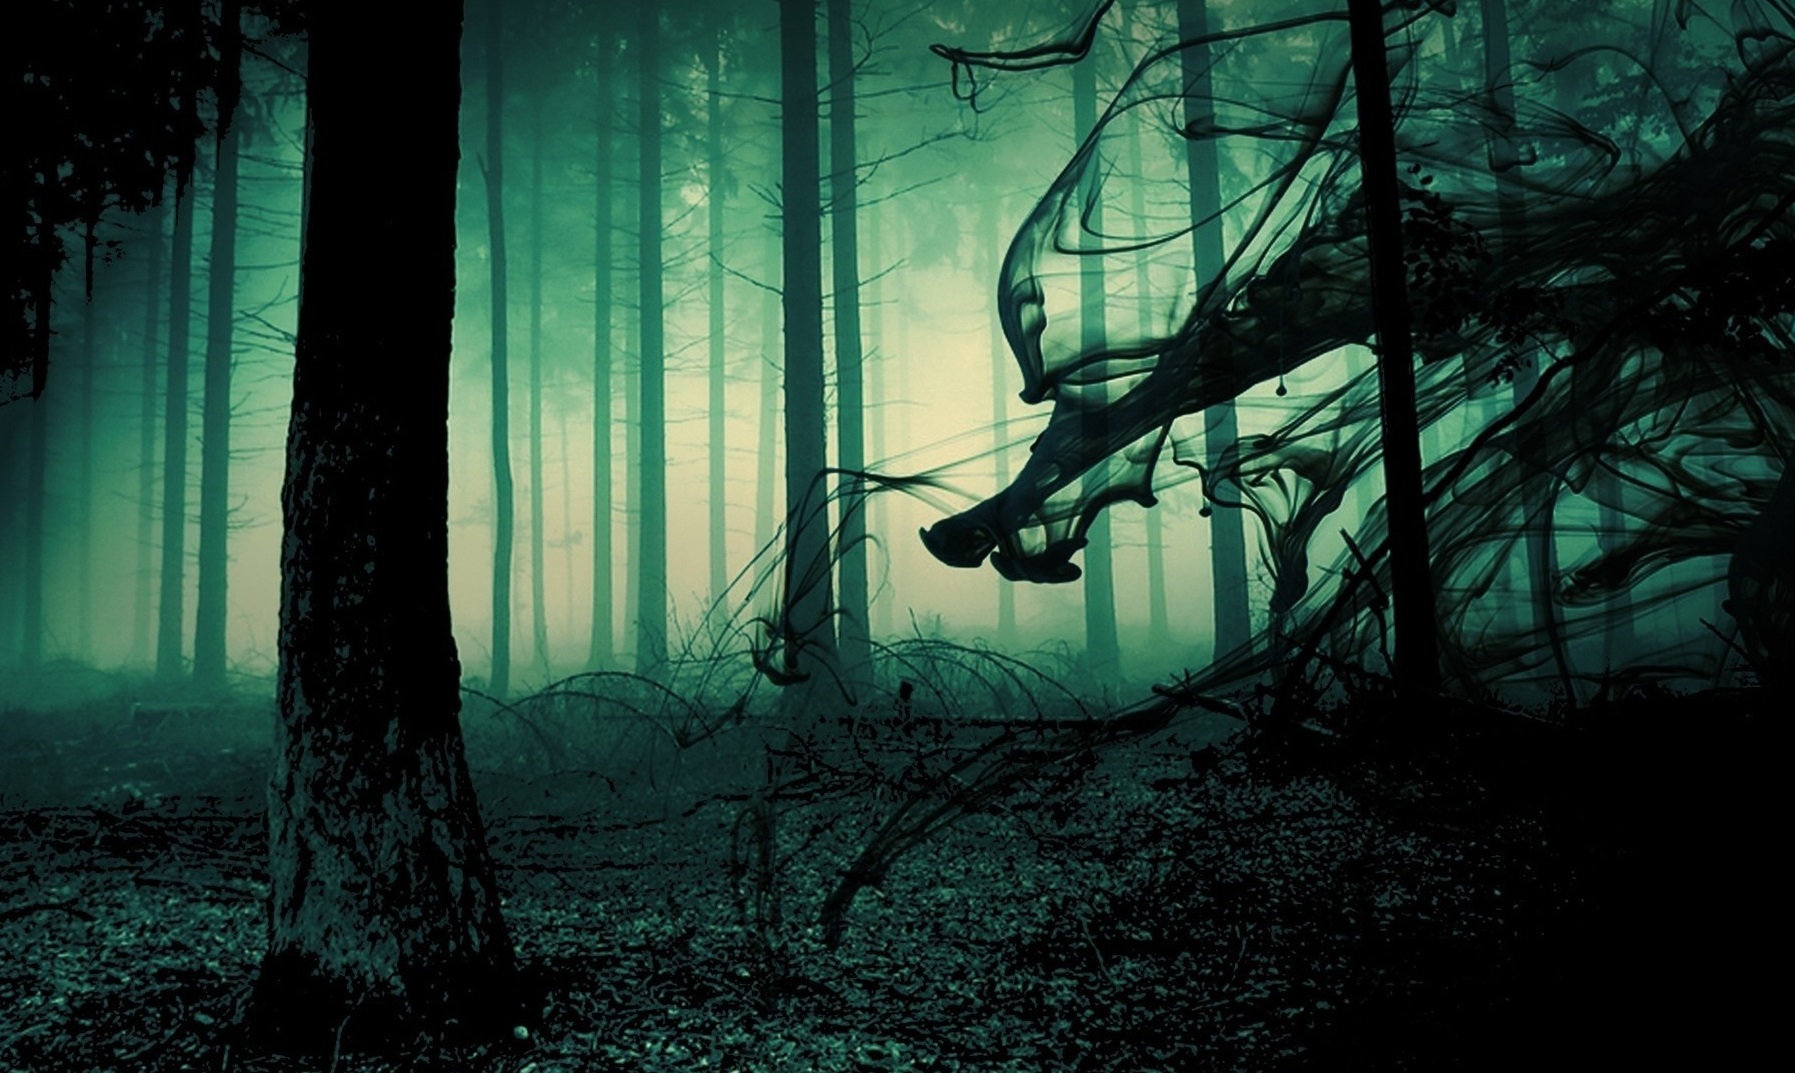 creepy forest wallpaper,forest,nature,natural environment,tree,old growth forest